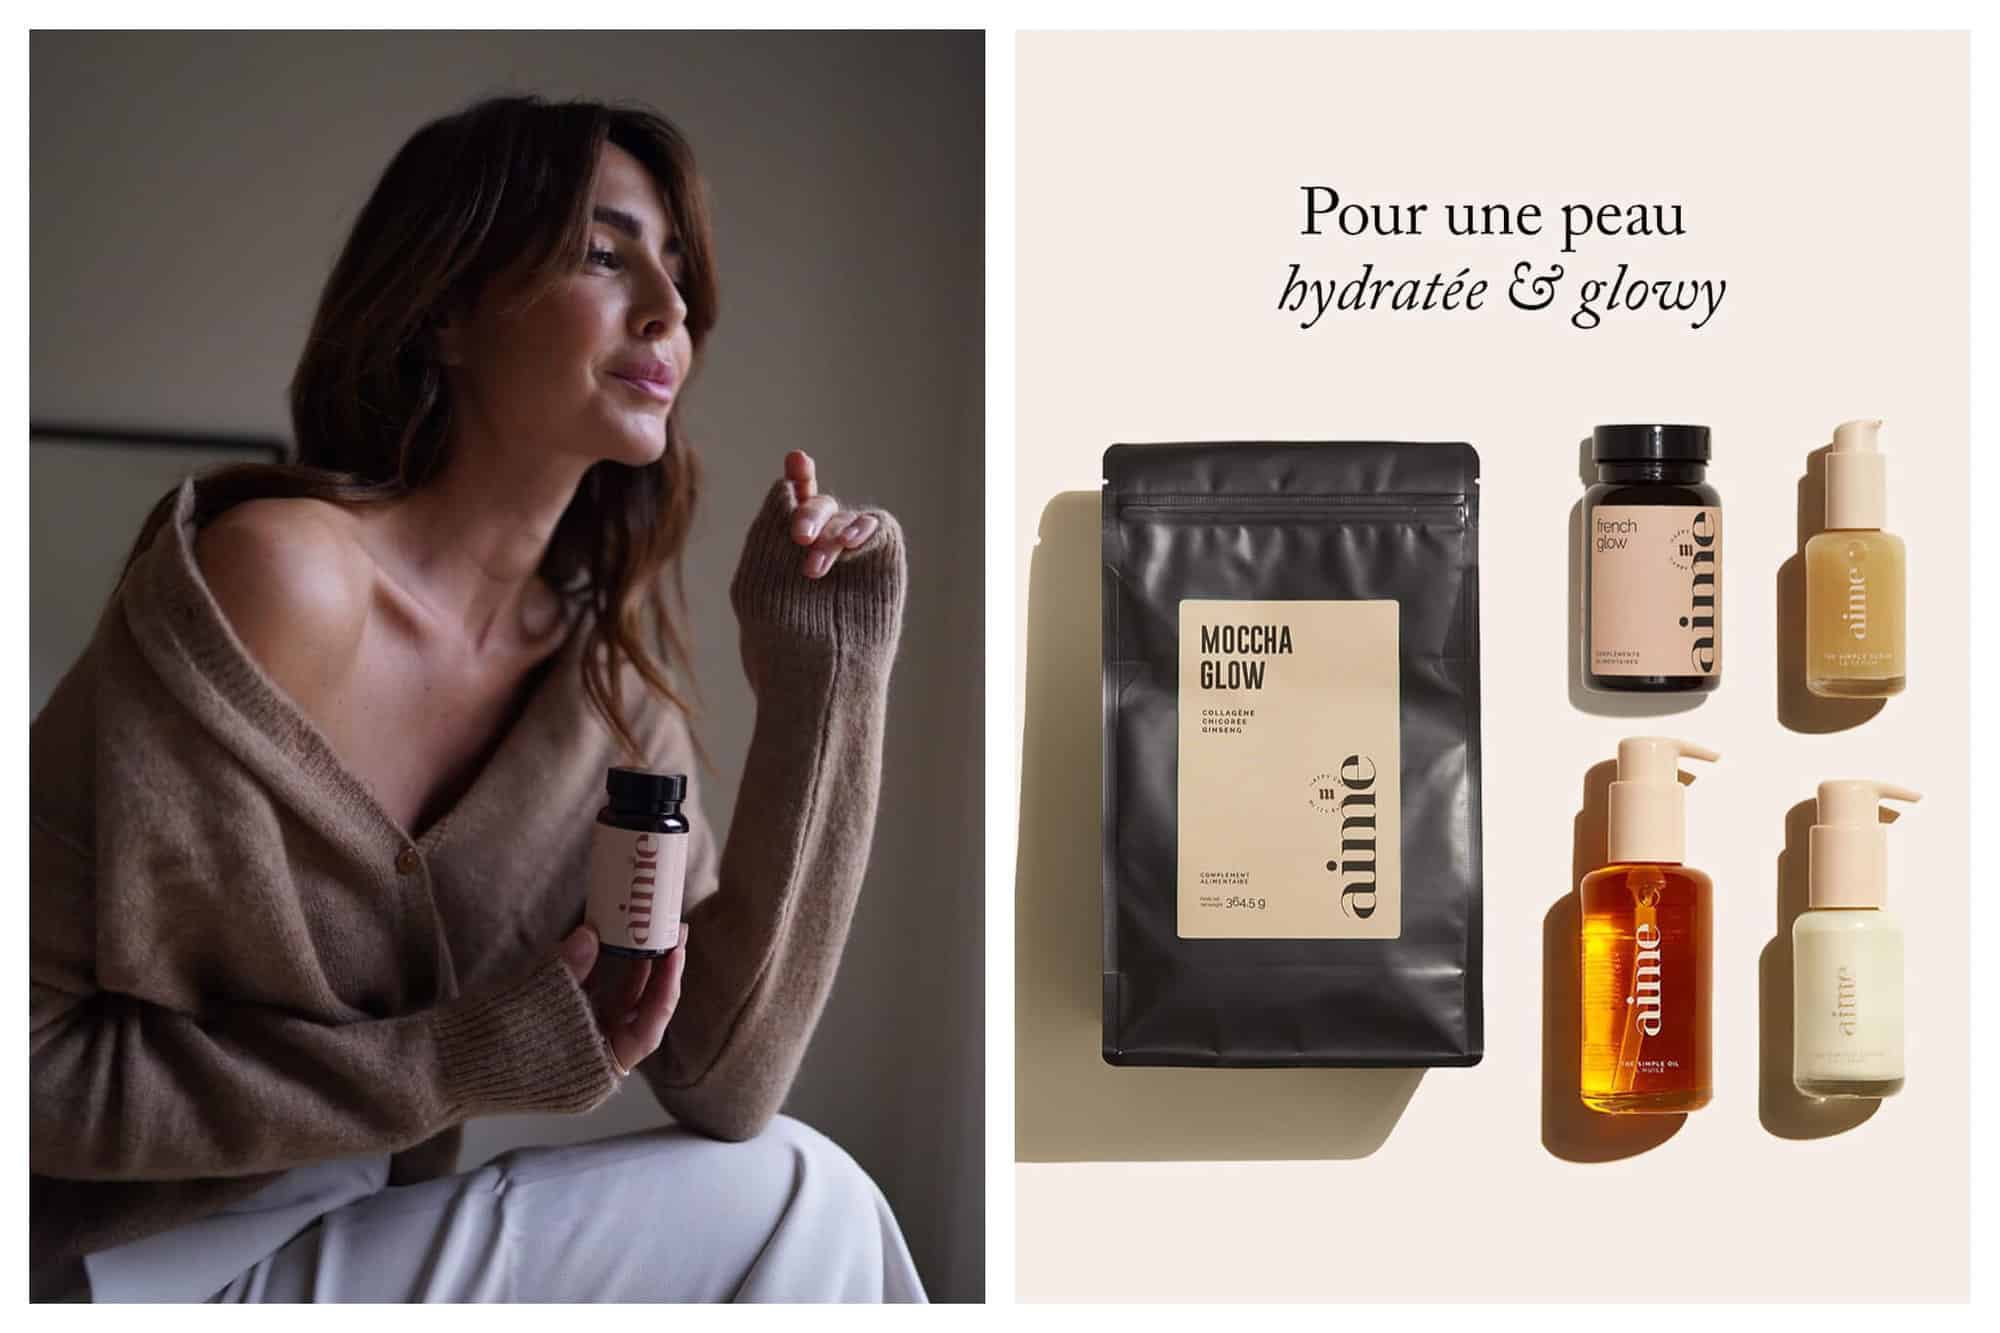 Left: a brunette woman in a brown knit holding a bottle of AIME dietary supplements. Right: the words 'Pour une peau hydratée & glowy' above various products from AIME. 